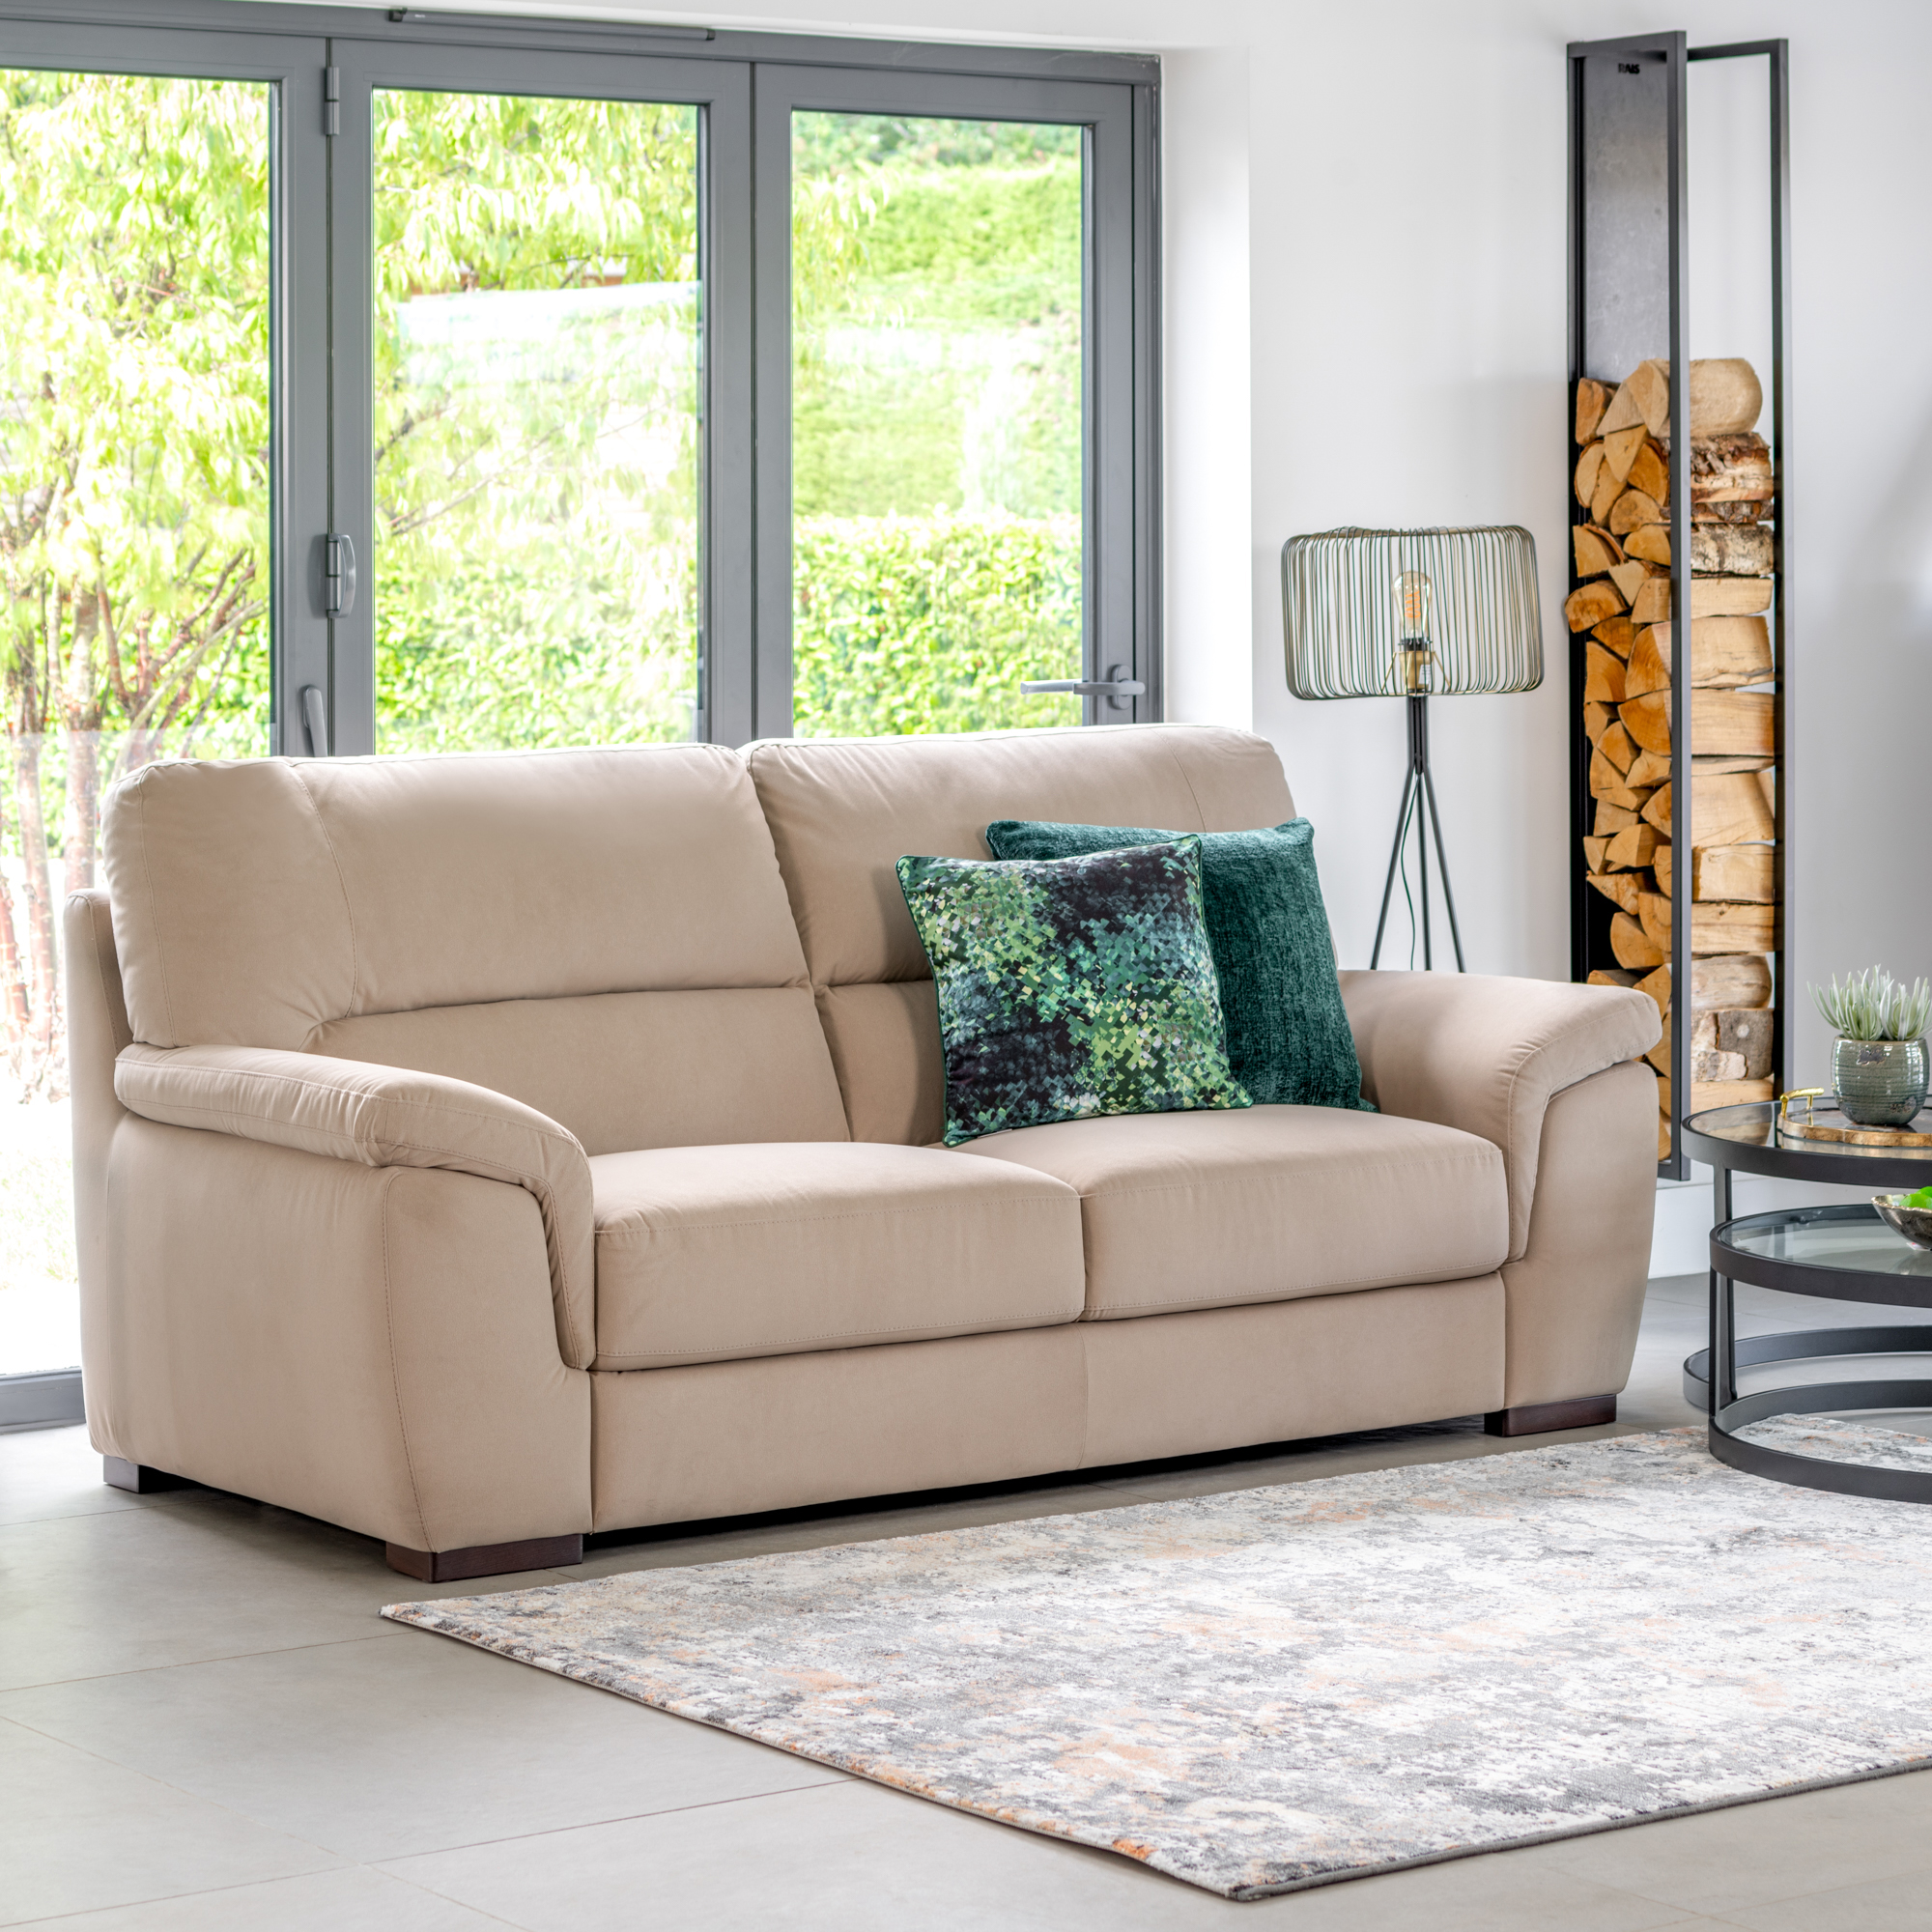 Which sofas are best to relieve back pain? | Fishpools